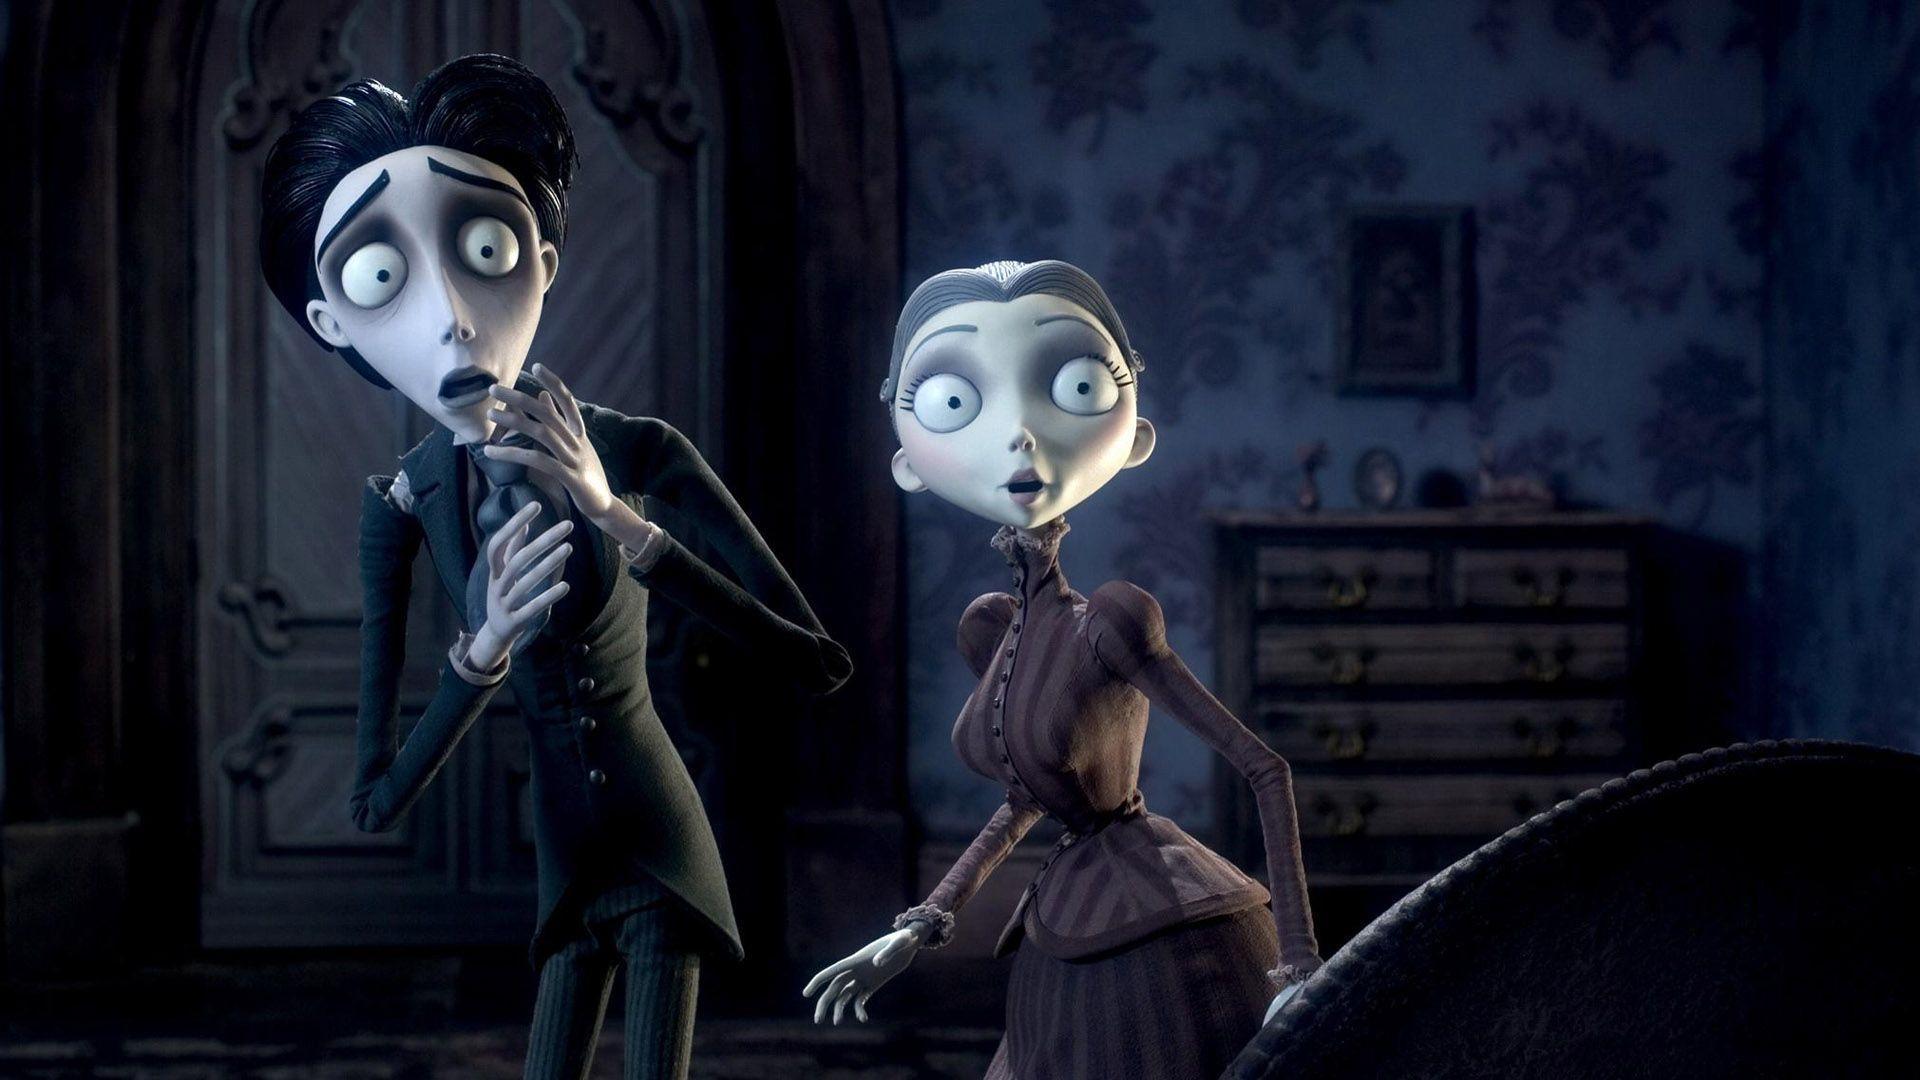 Corpse Bride Wallpaper High Quality 18152 HD Picture. Best